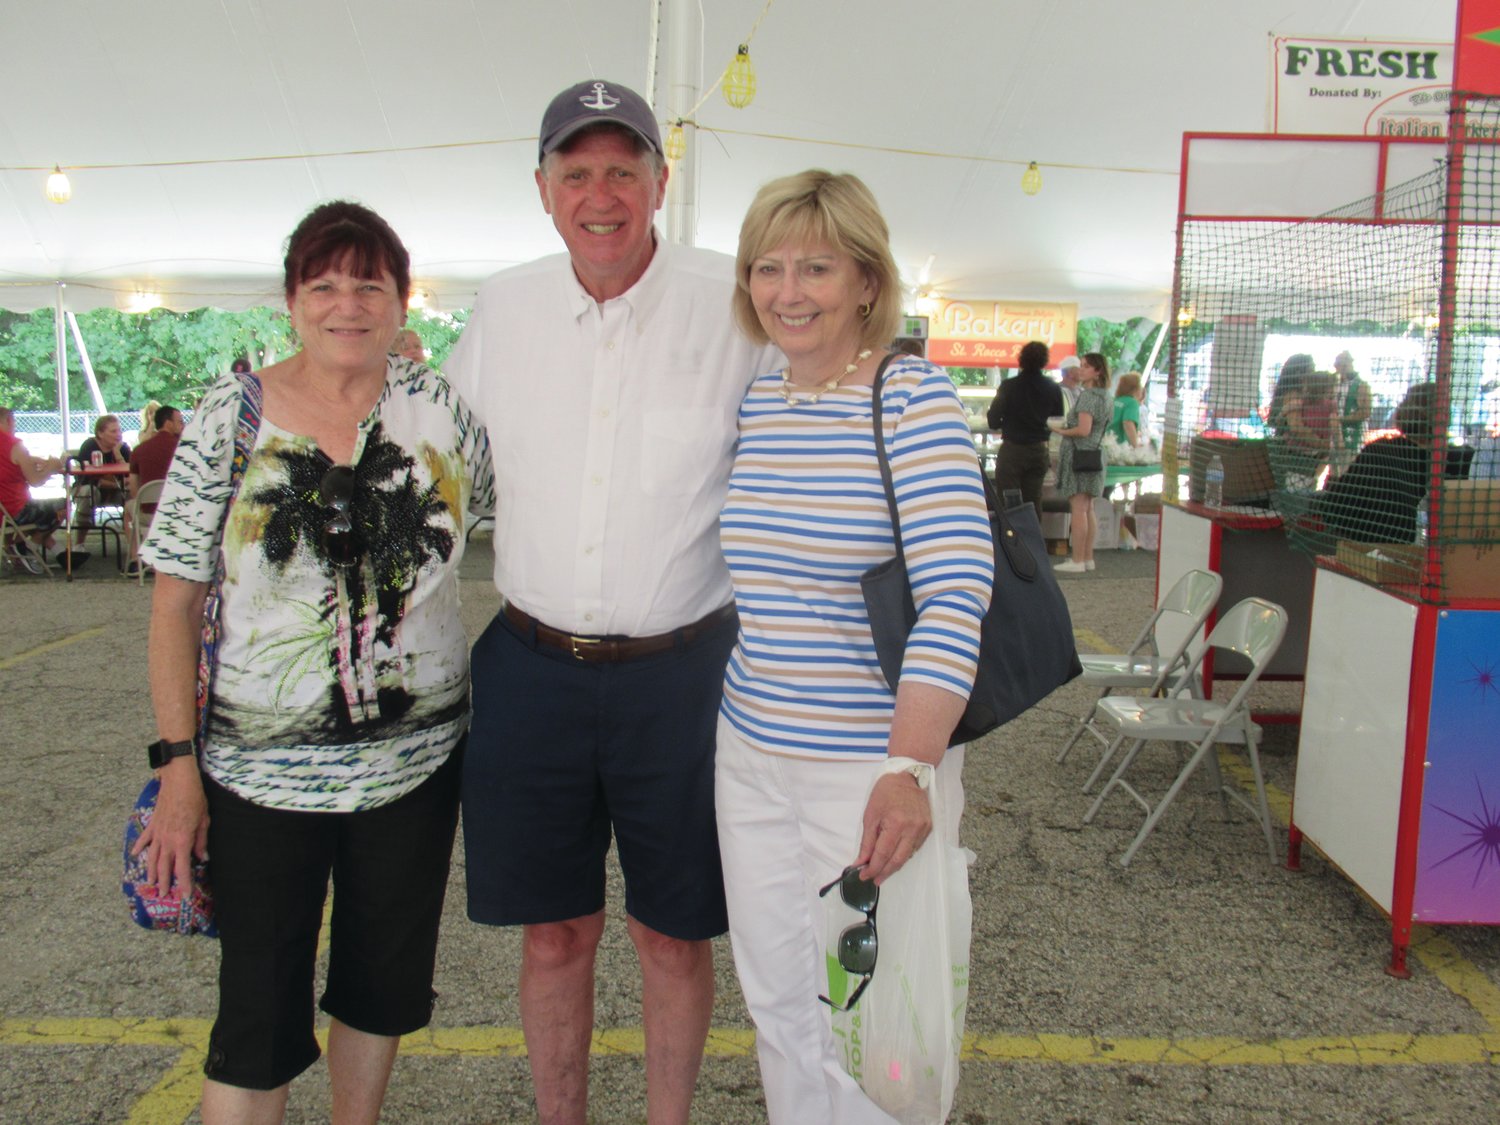 GRAND GUESTS: Gov. Daniel McKee and his wife Susan received warm welcome during Sunday’s Saint Rocco’s Feast and Festival from countless people including Johnston Town Councilwoman Linda Folcarelli.